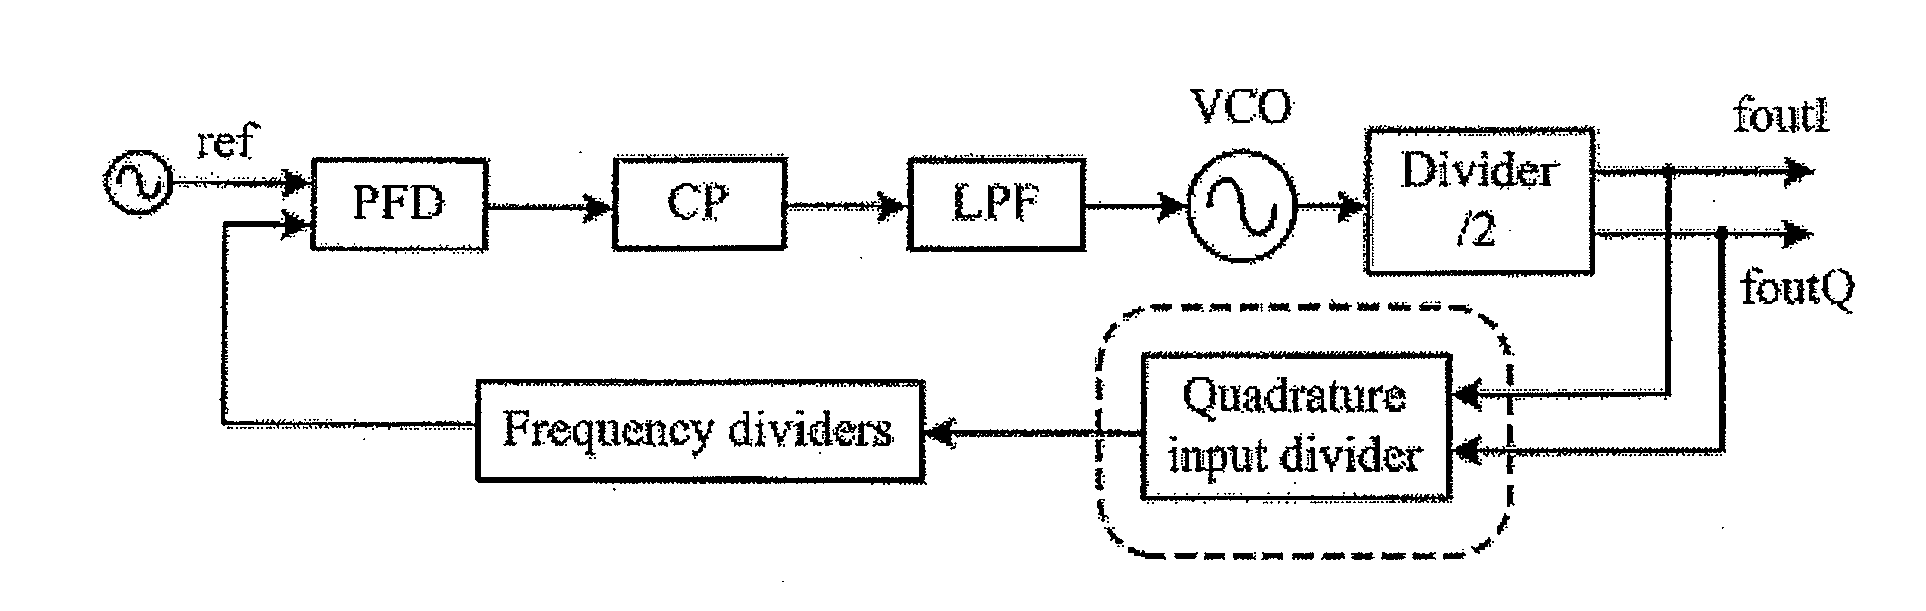 Quadrature-input, quadrature-output, divider and phase locked loop, frequency synthesiser or single side band mixer